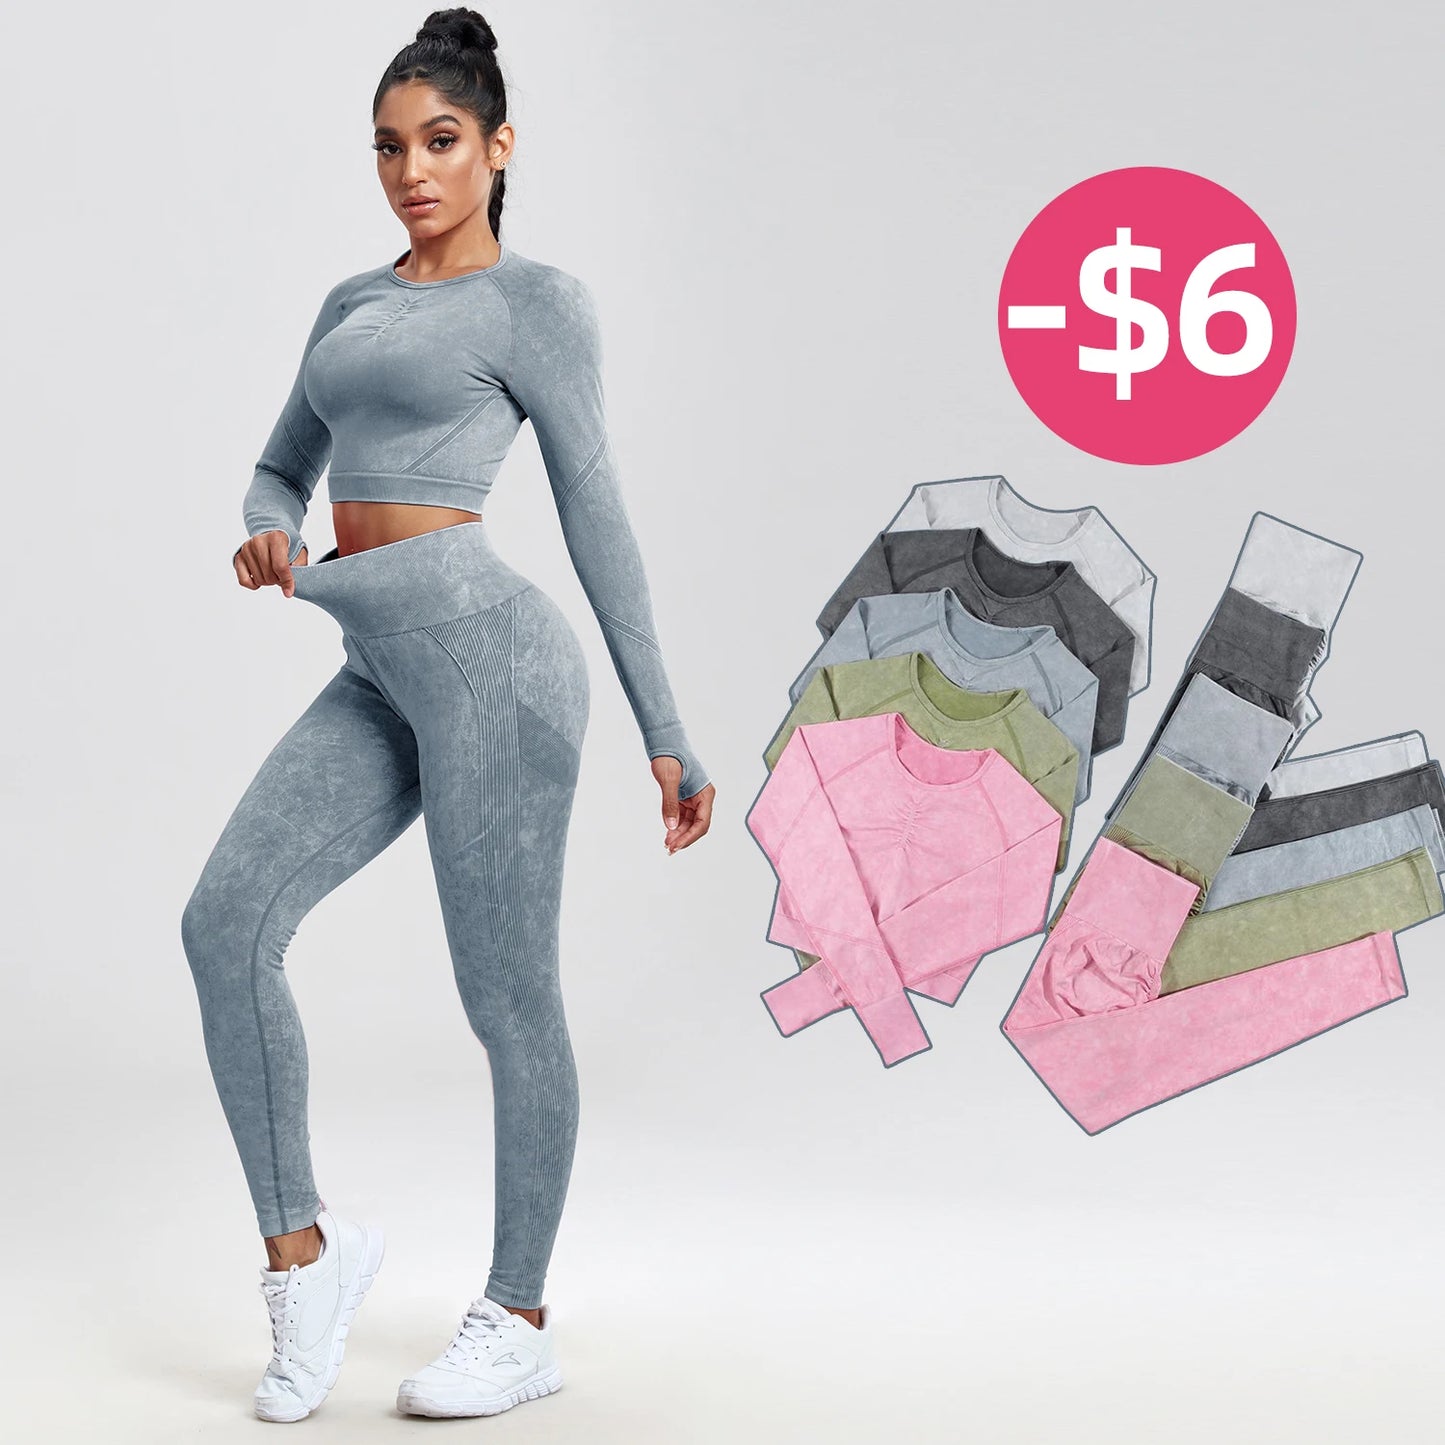 Upgrade Your Workout with NORMOV Gym Set - High Waist, Seamless, Push Up, Long Sleeve - Shop Now!